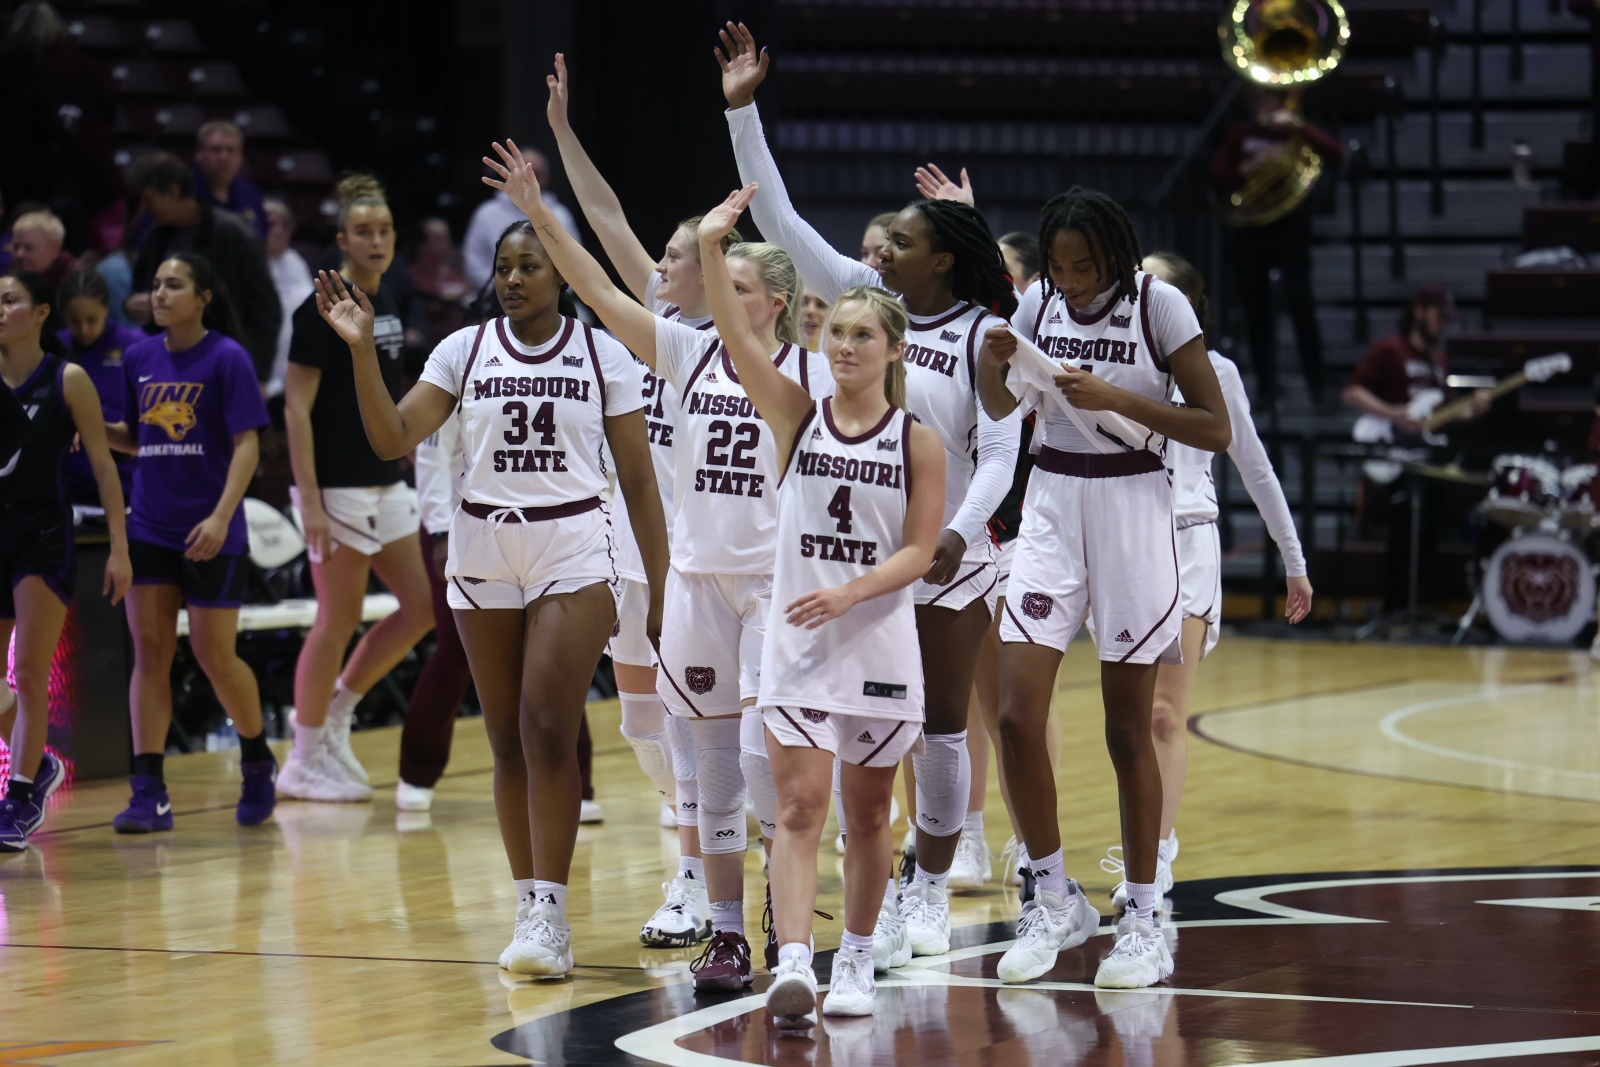 The Missouri State Lady Bears wave to the crowd as they walk off the court after a basketball game at Great Southern Bank Arena